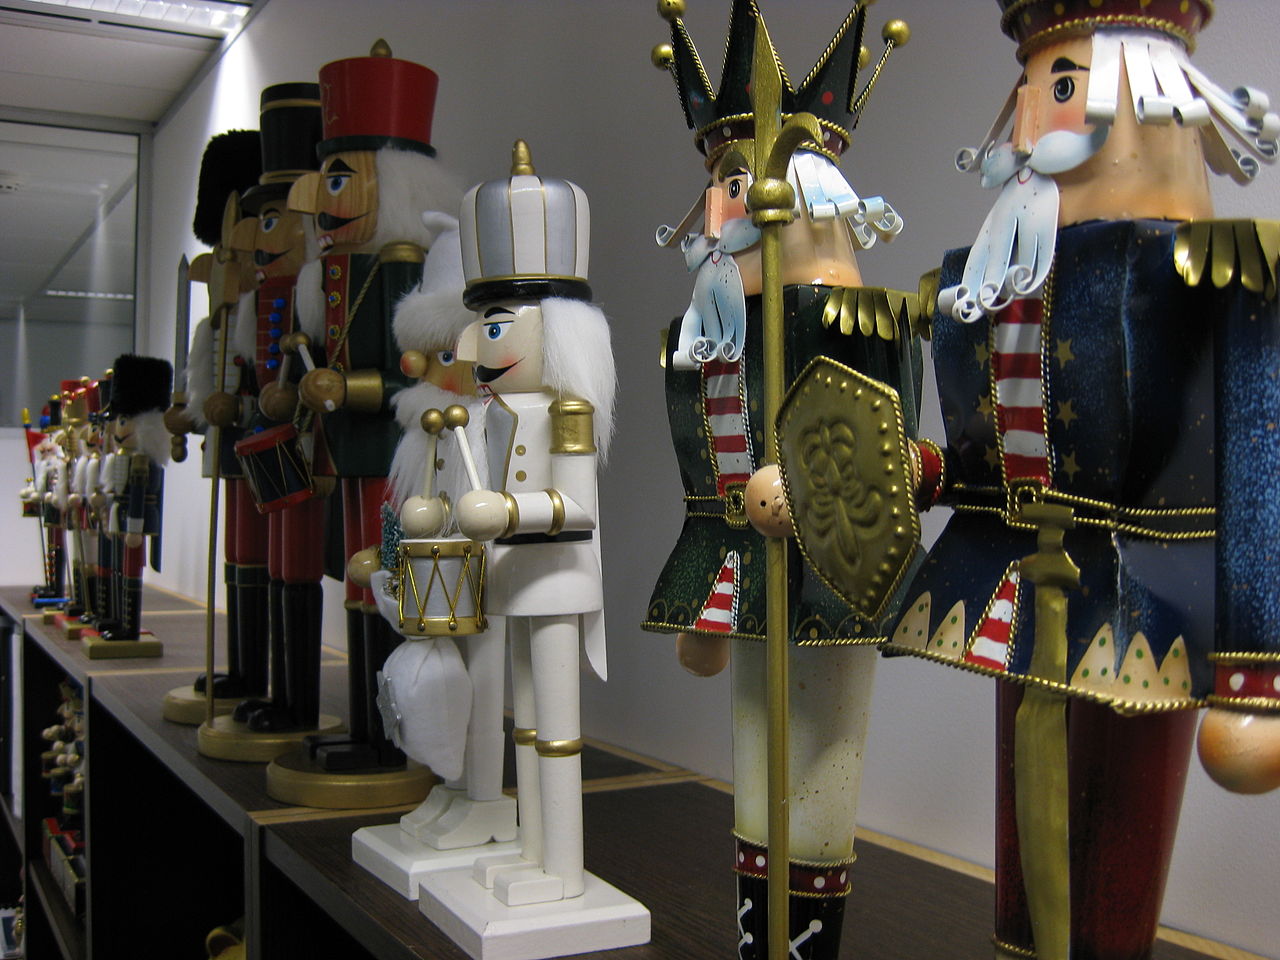 A collection of fairy tale nutcrackers